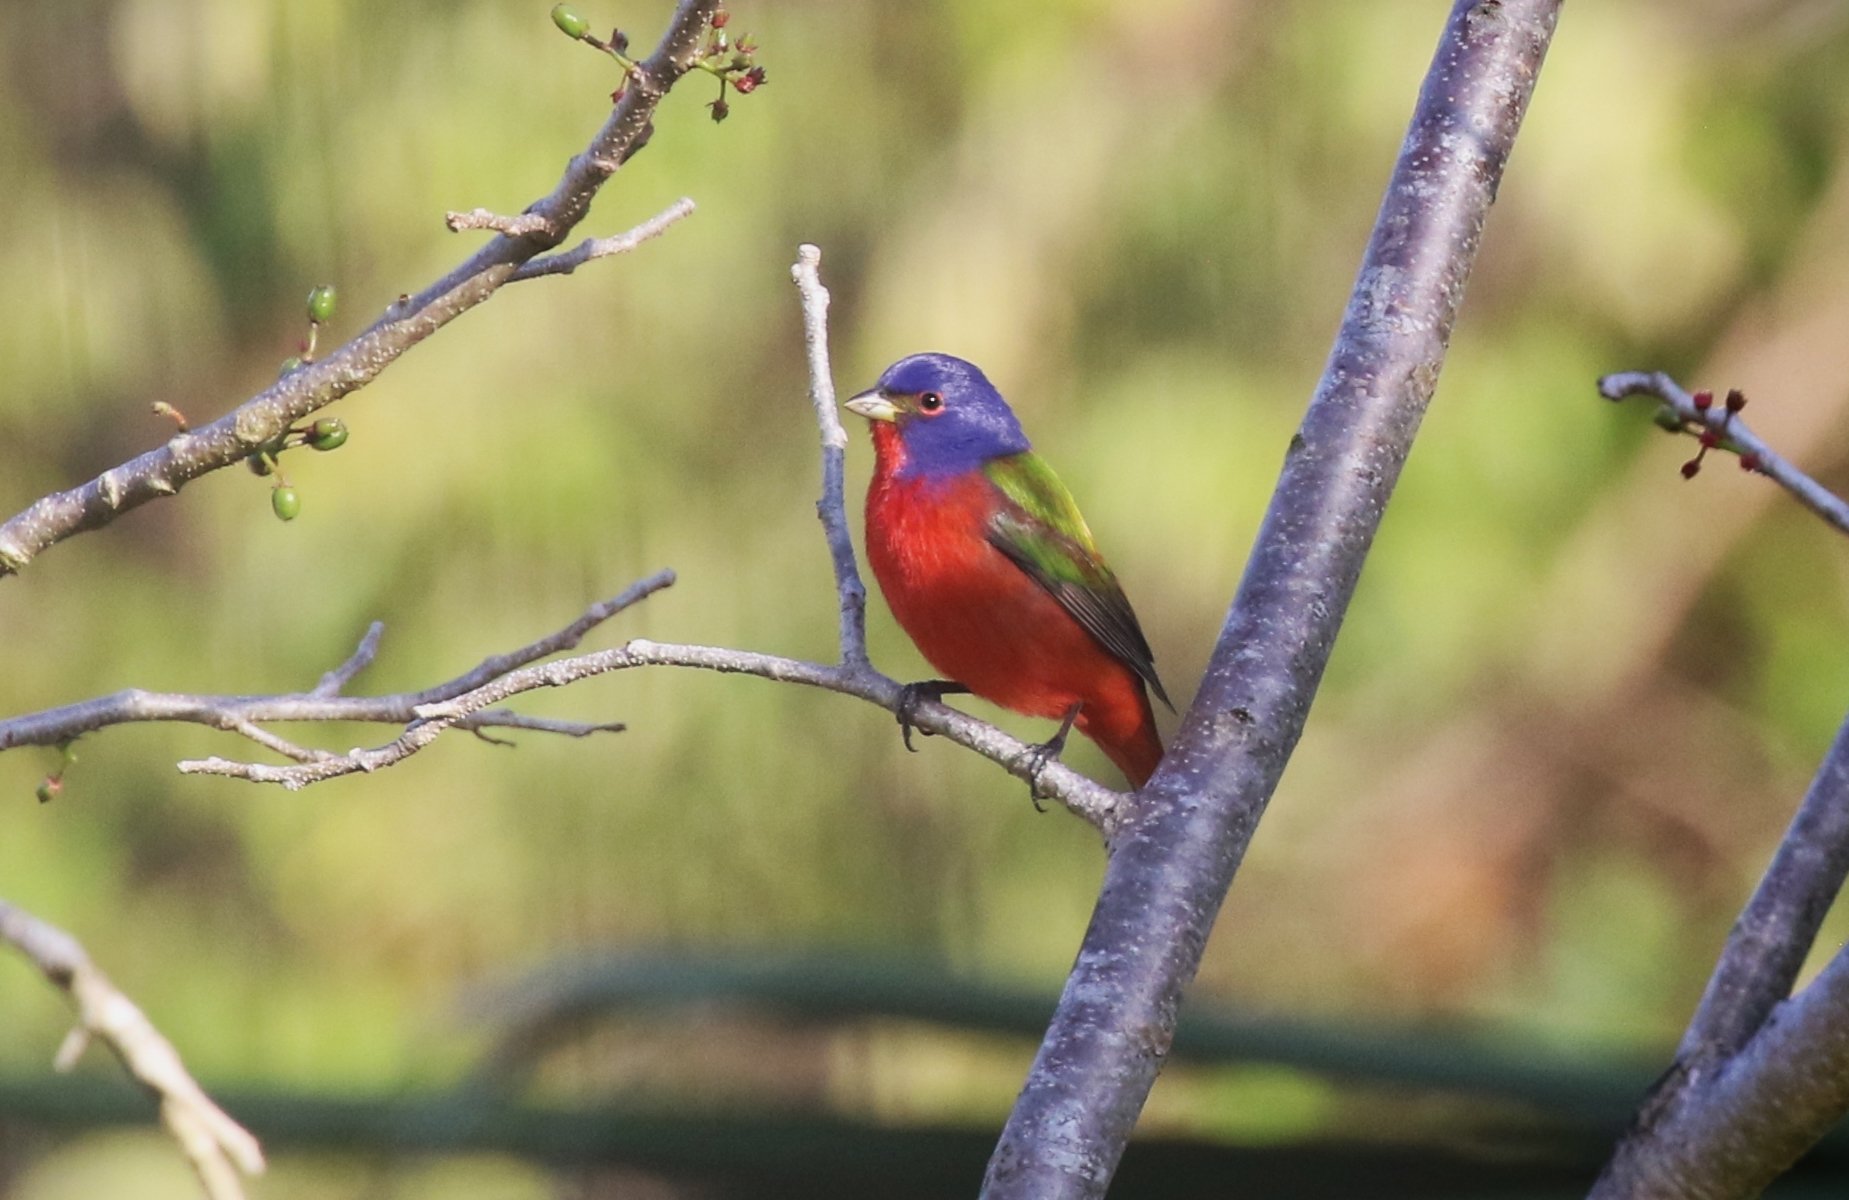 Painted Bunting - photo by participant Diane Eubanks